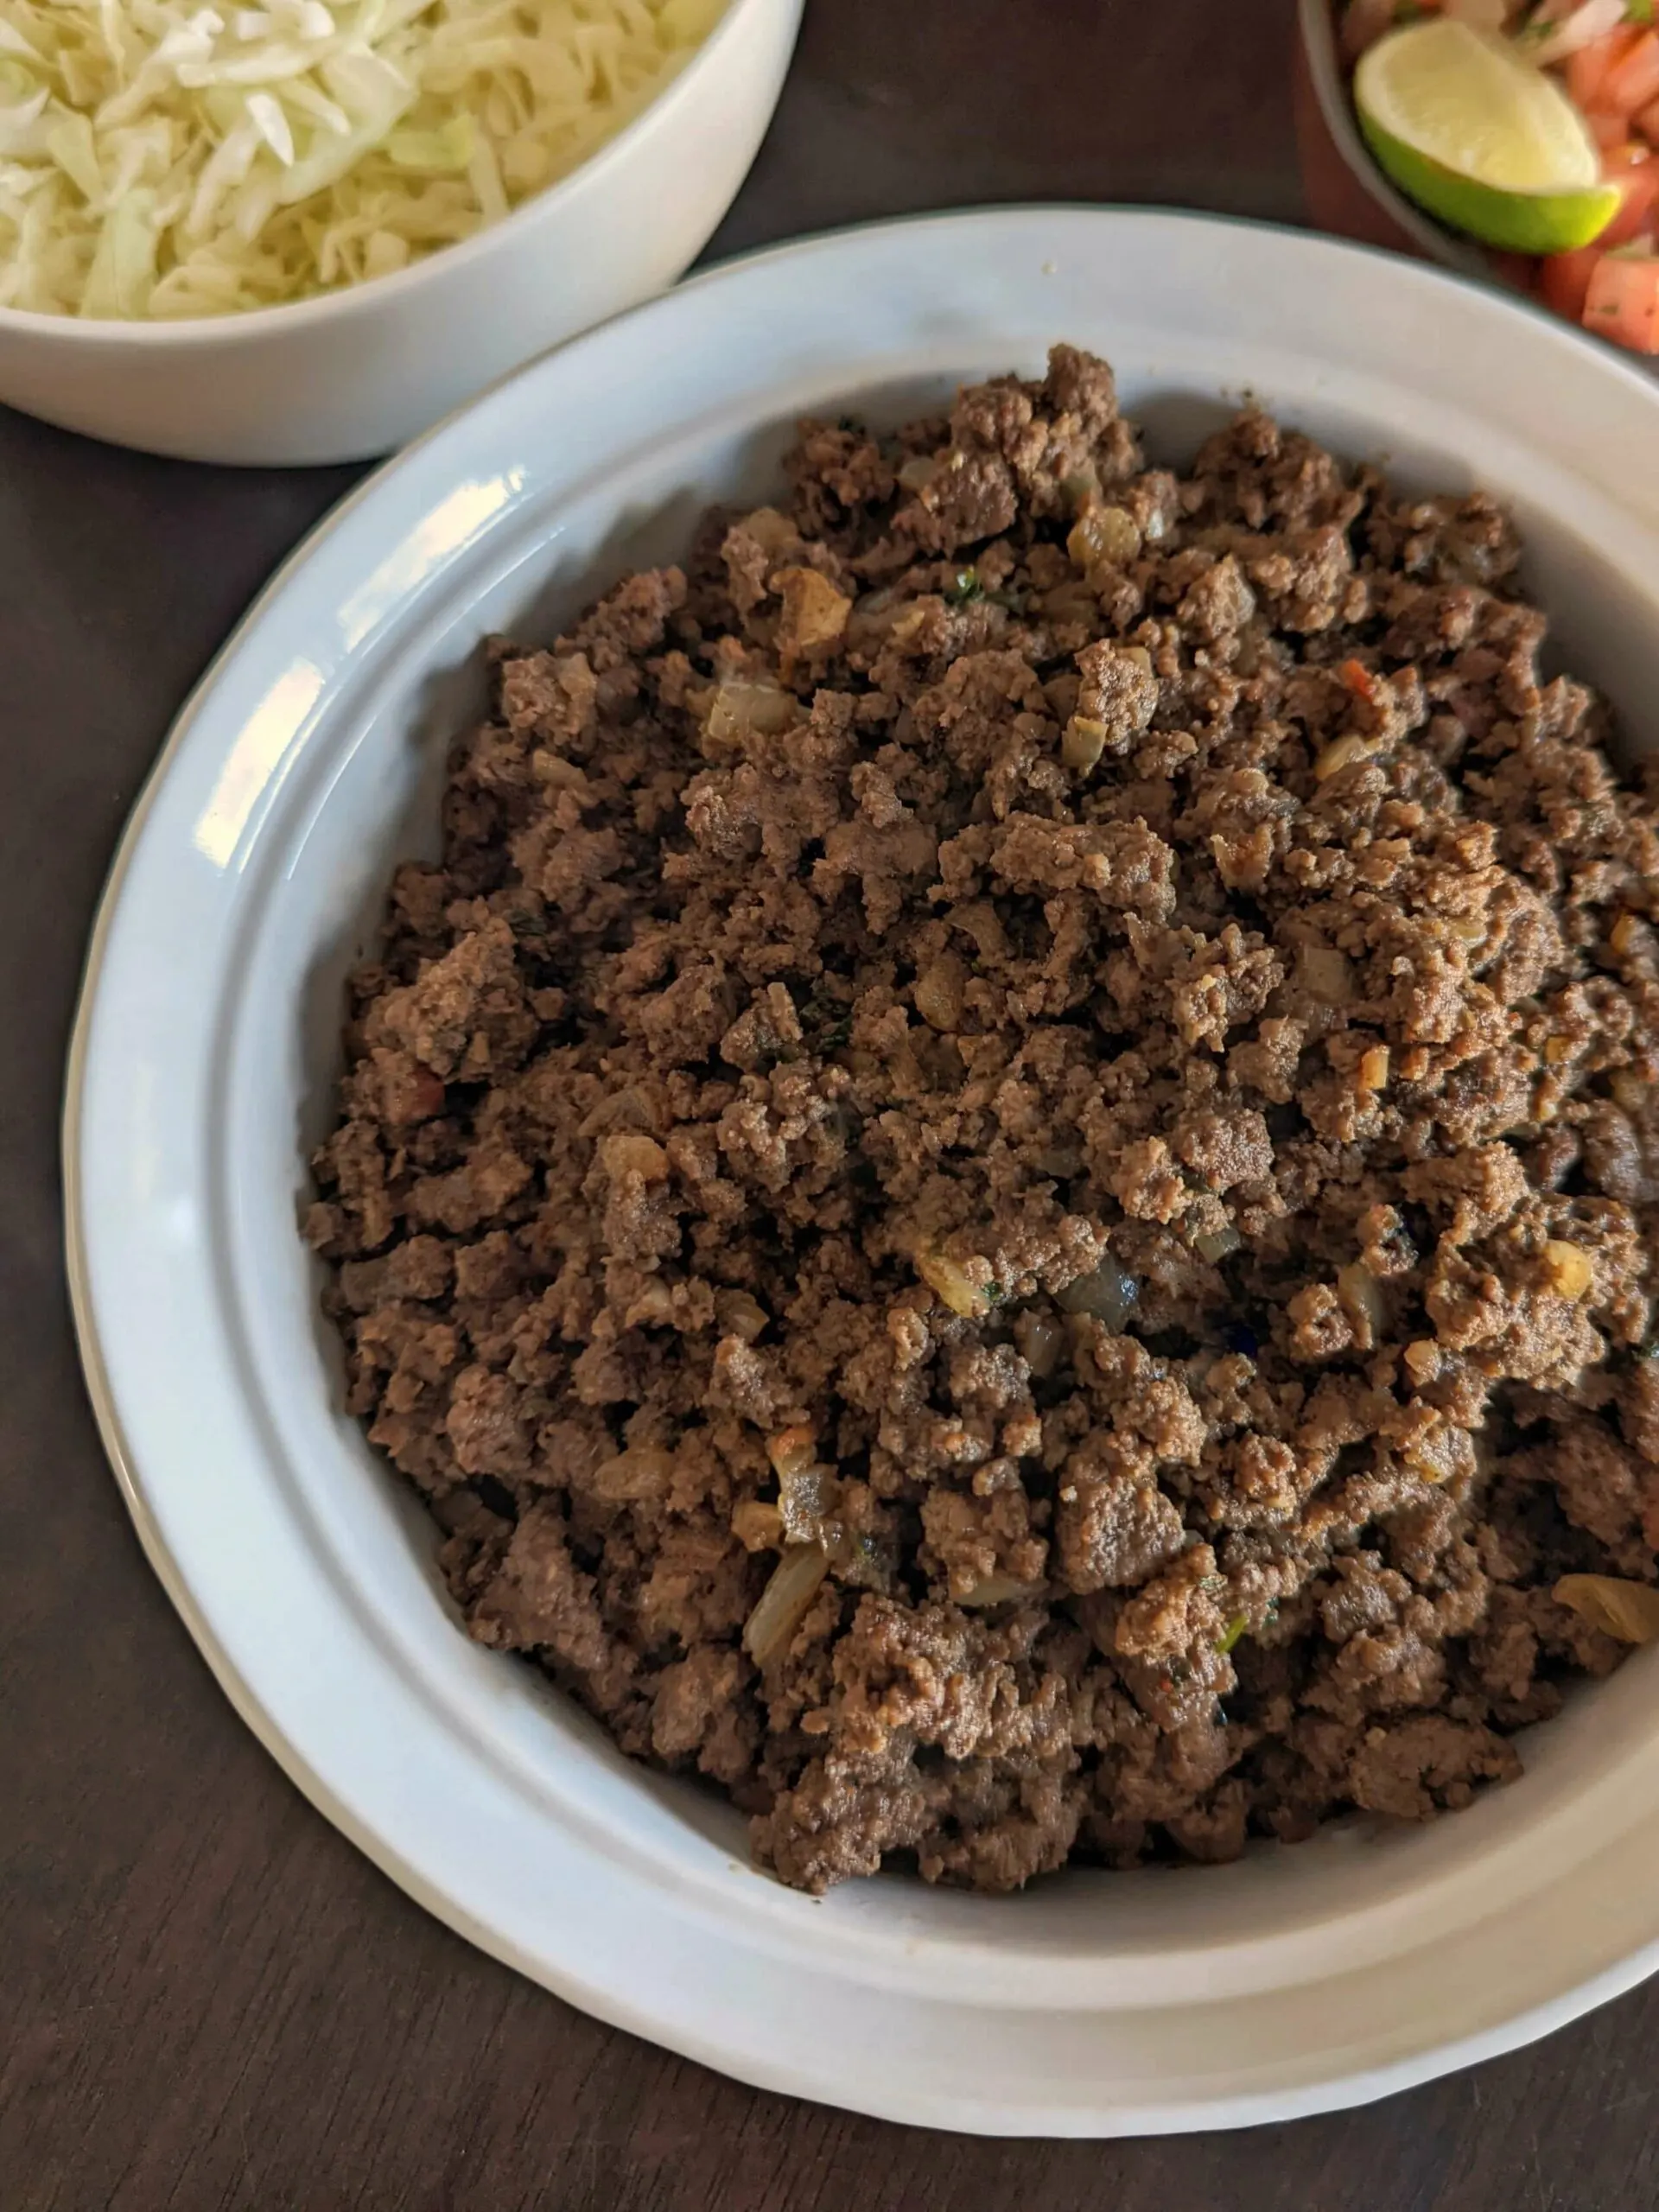 A taco bar with a serving of ground beef in the center.